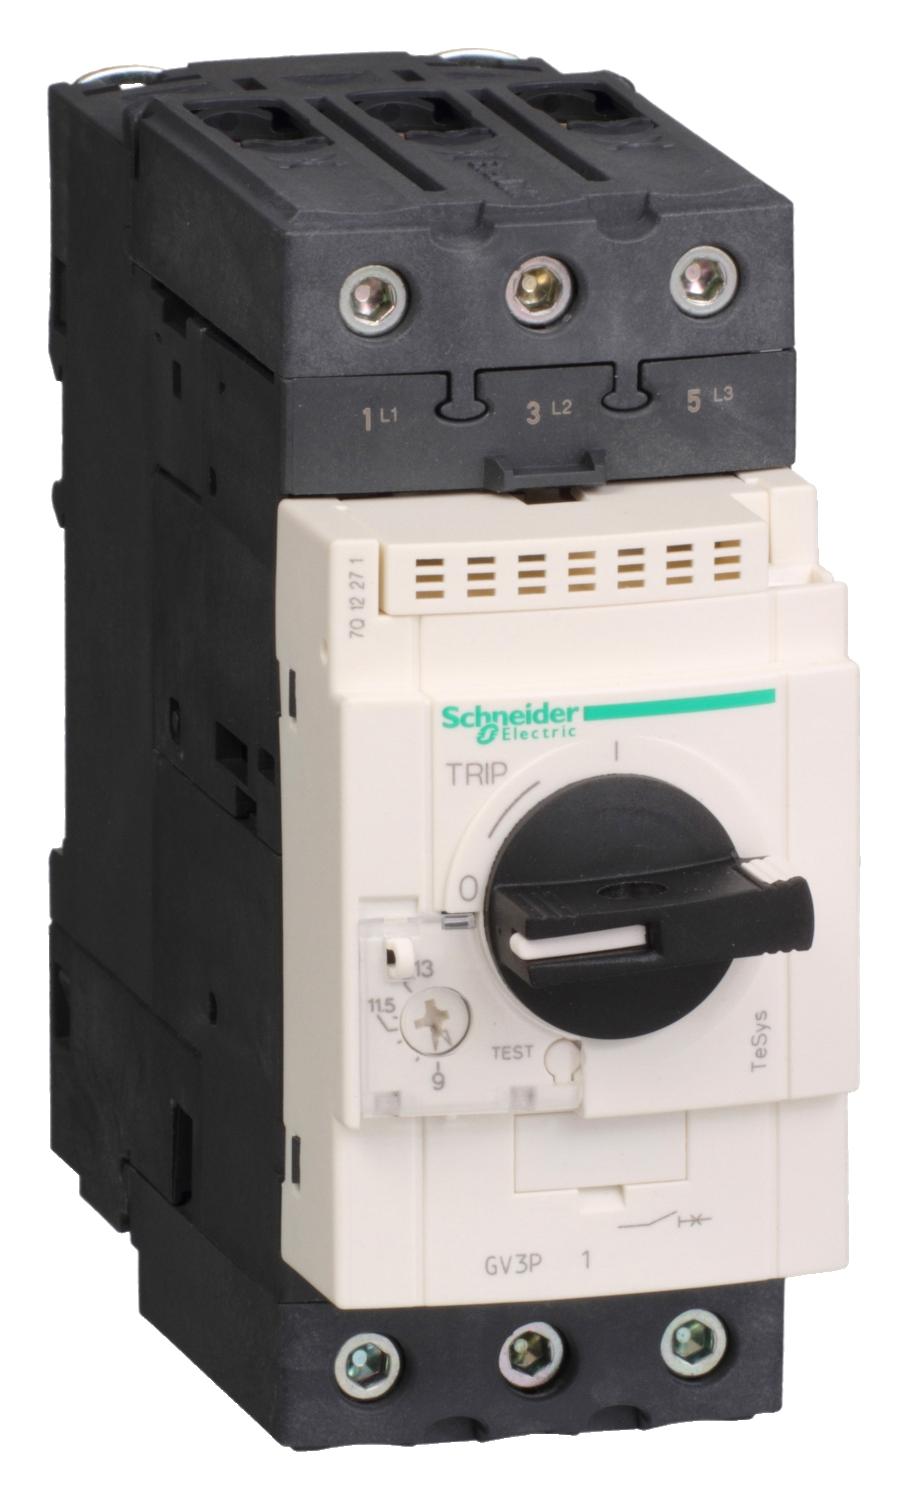 GV3P18 THERMAL MAGNETIC CIRCUIT BREAKER SCHNEIDER ELECTRIC